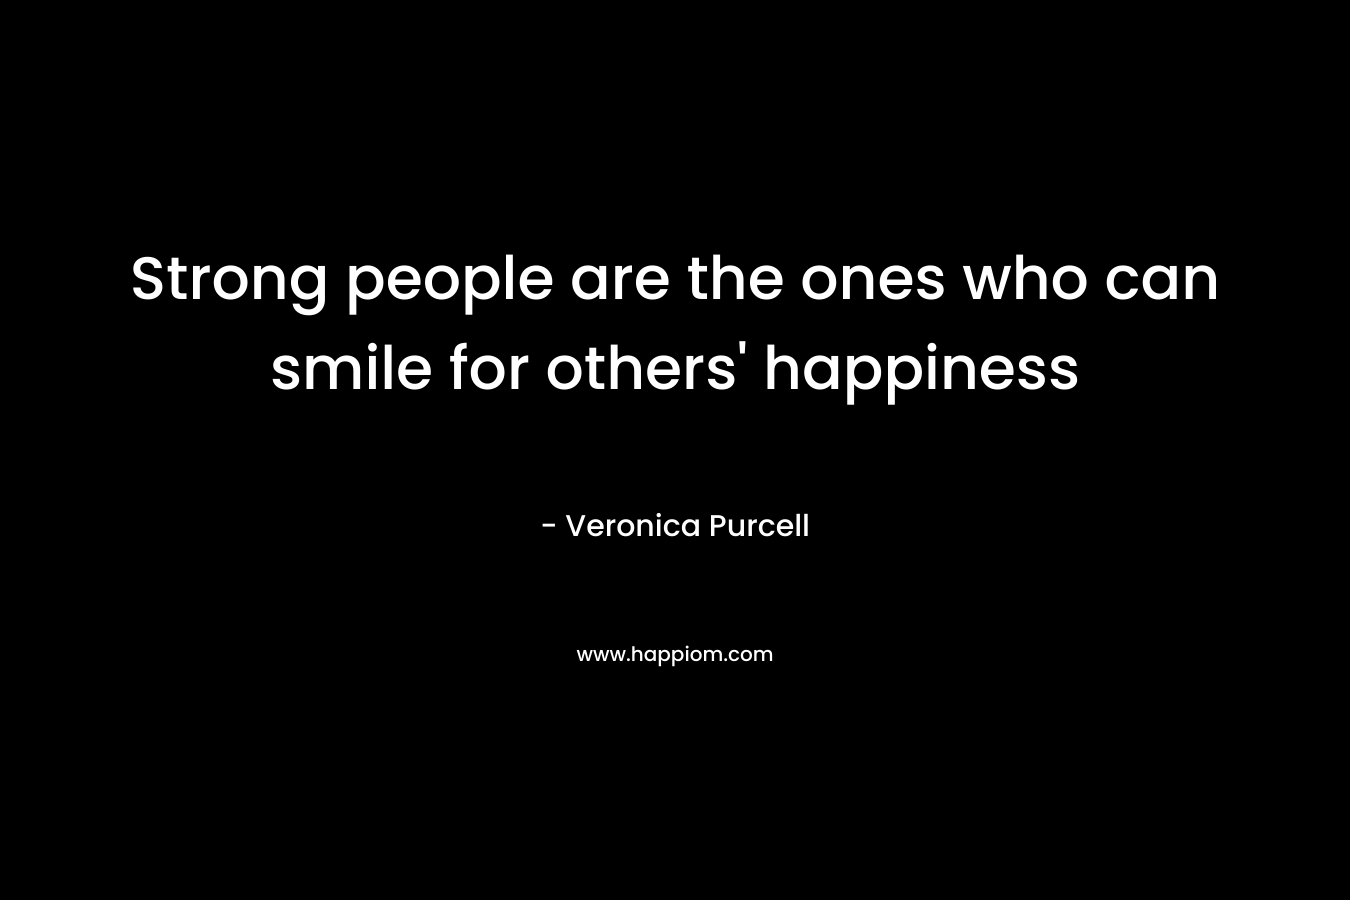 Strong people are the ones who can smile for others' happiness